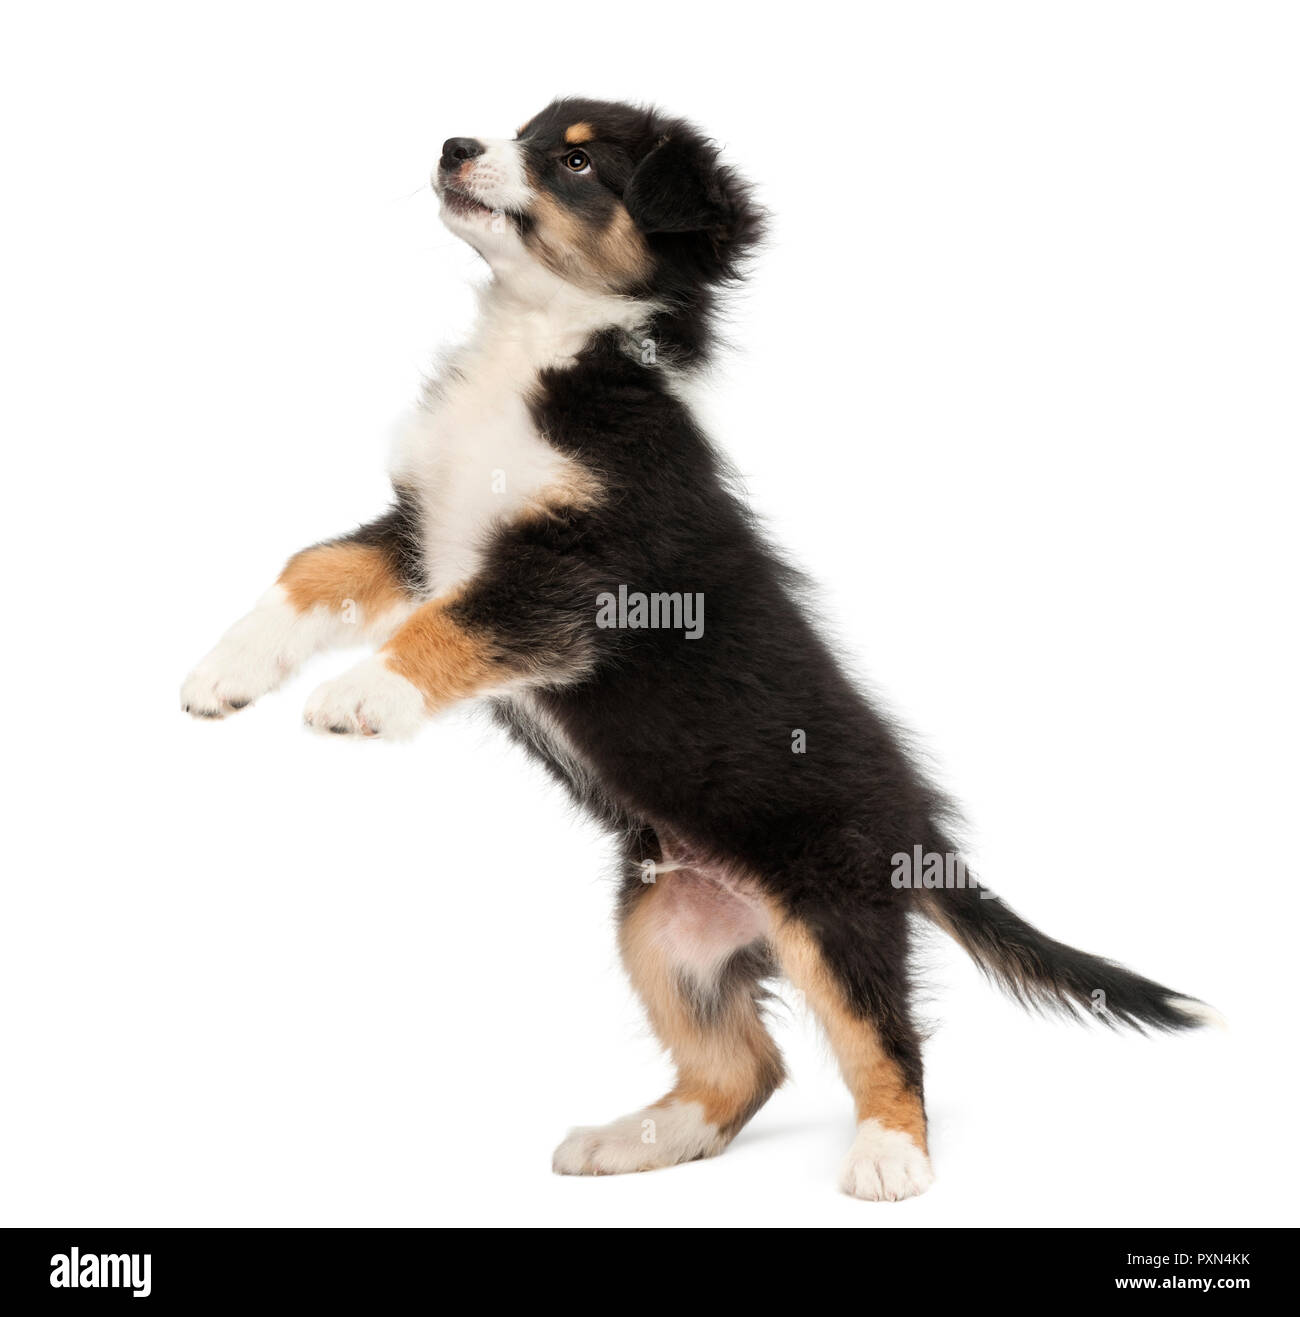 Australian Shepherd puppy, 2 months old, standing on hind legs and looking up against white background Stock Photo